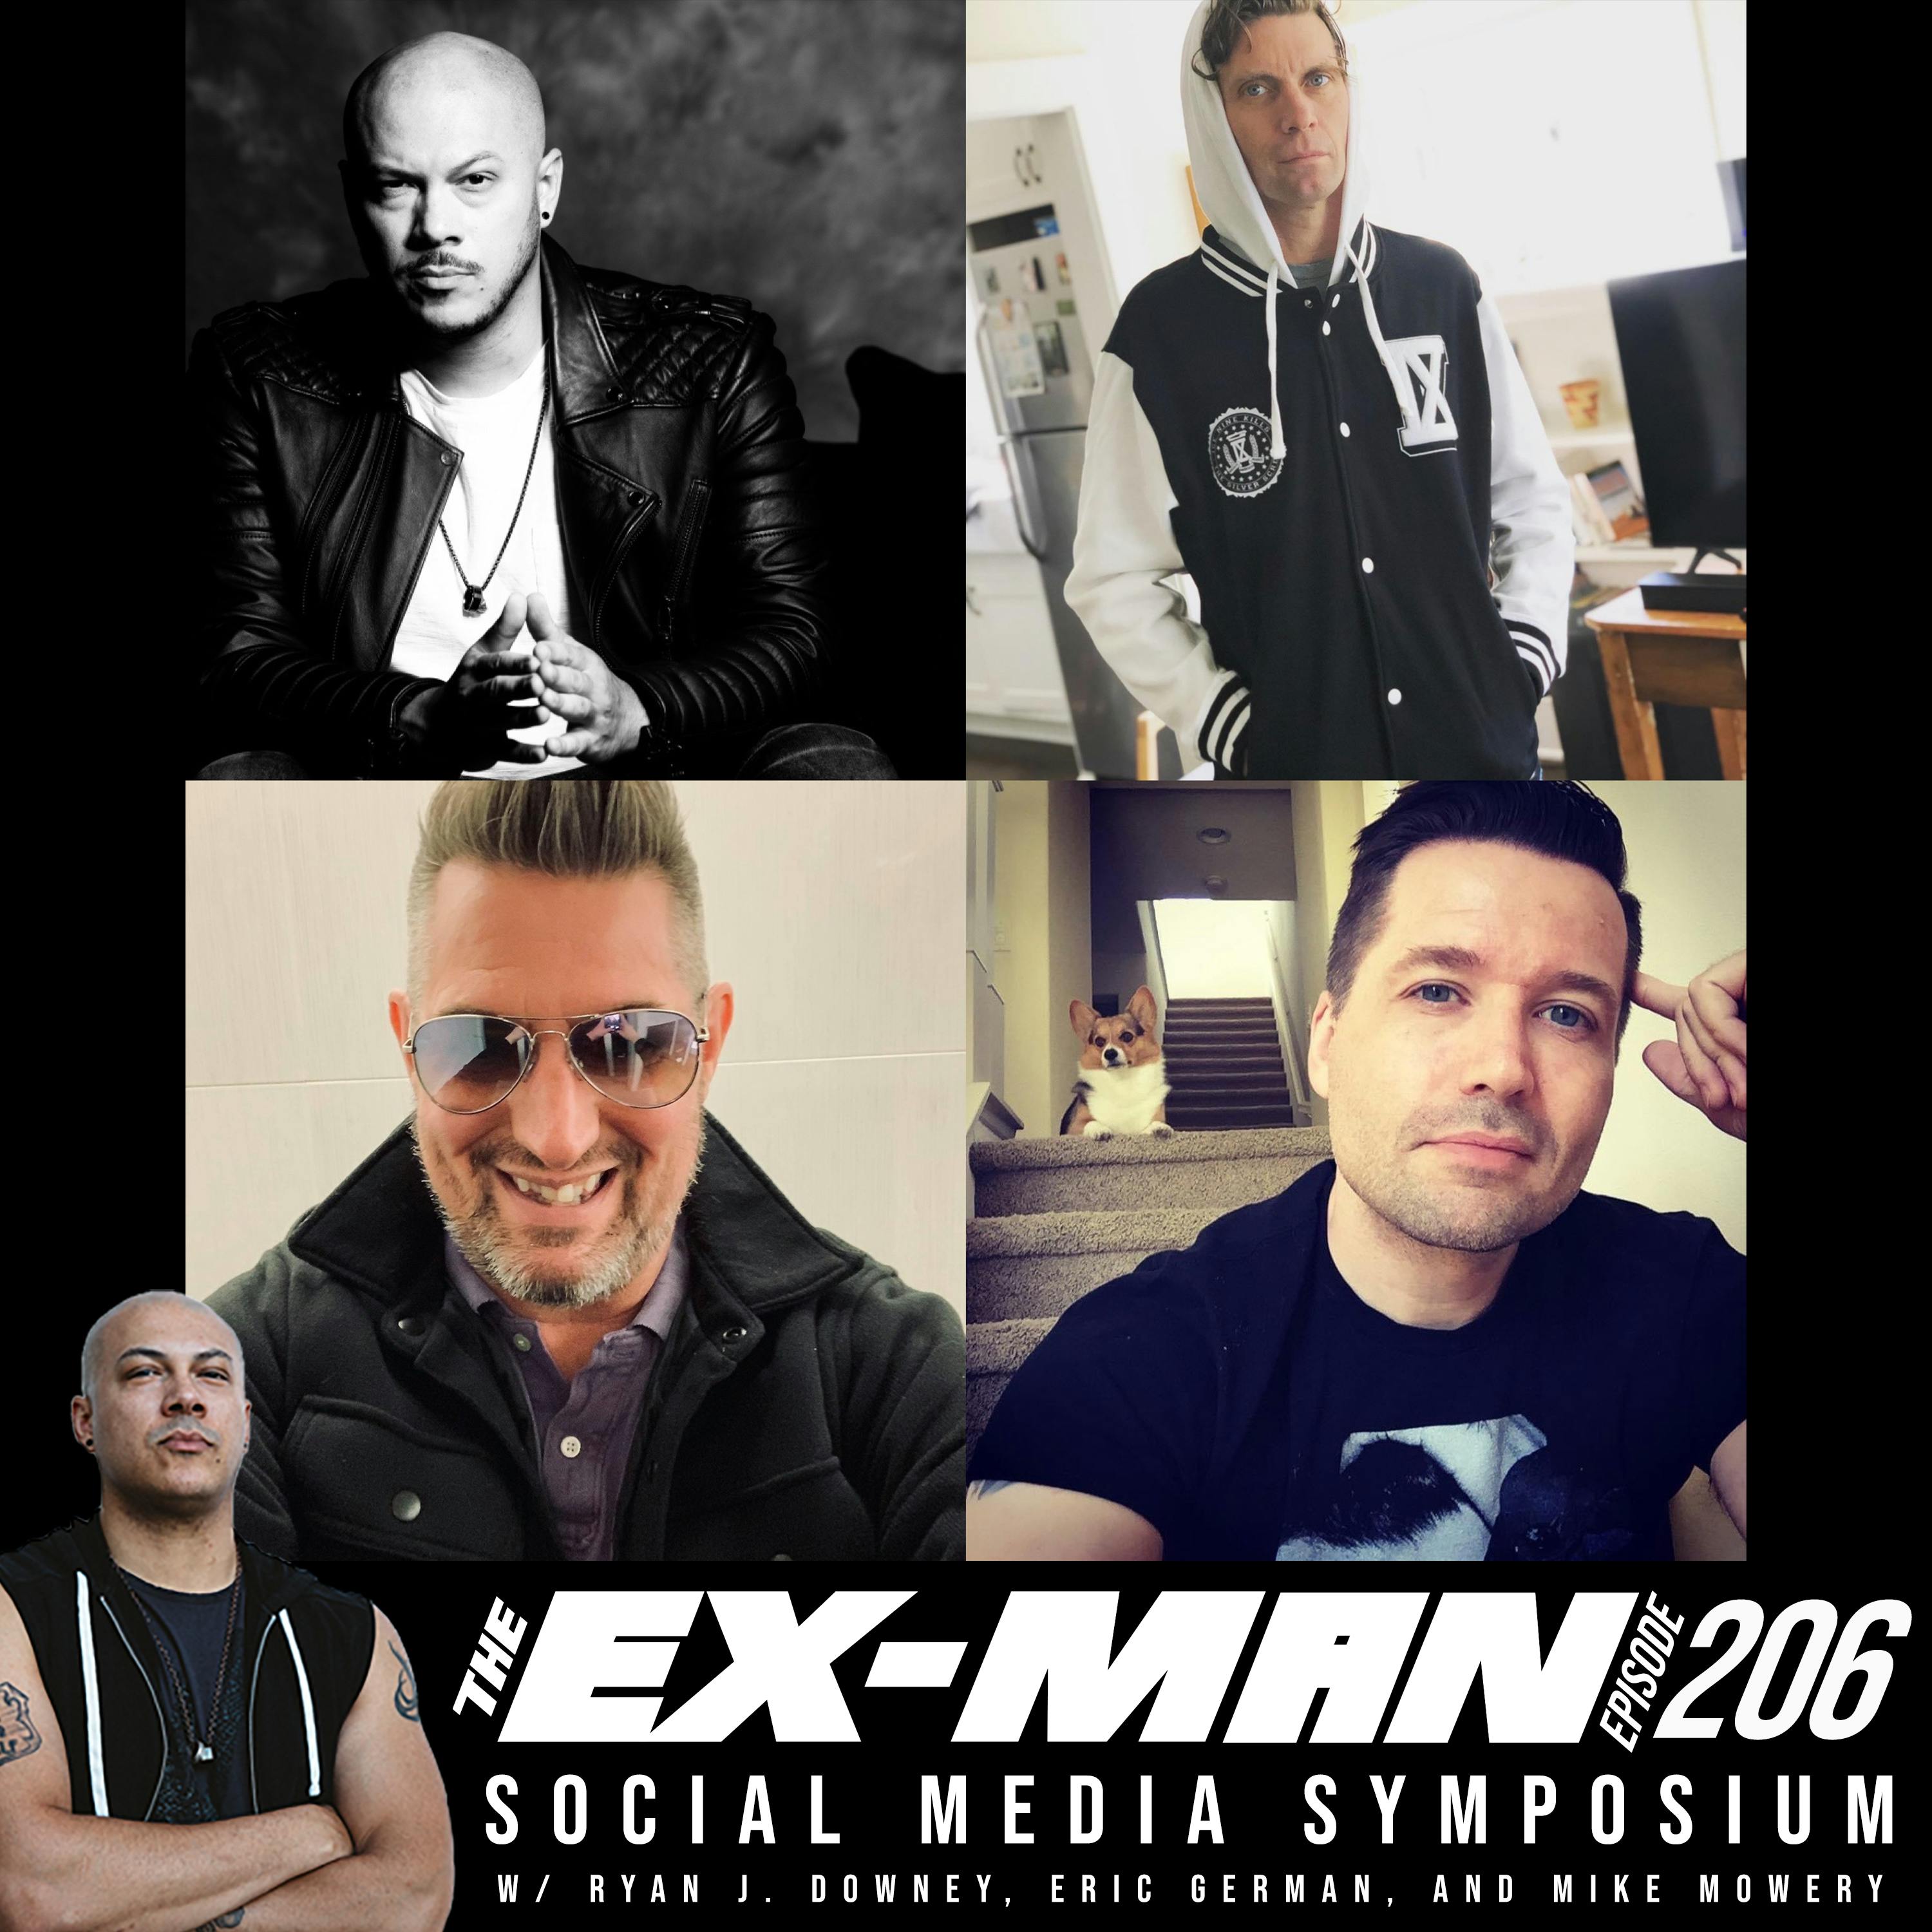 The Social Media Symposium with Ryan J. Downey, Eric German, and Mike Mowery Image